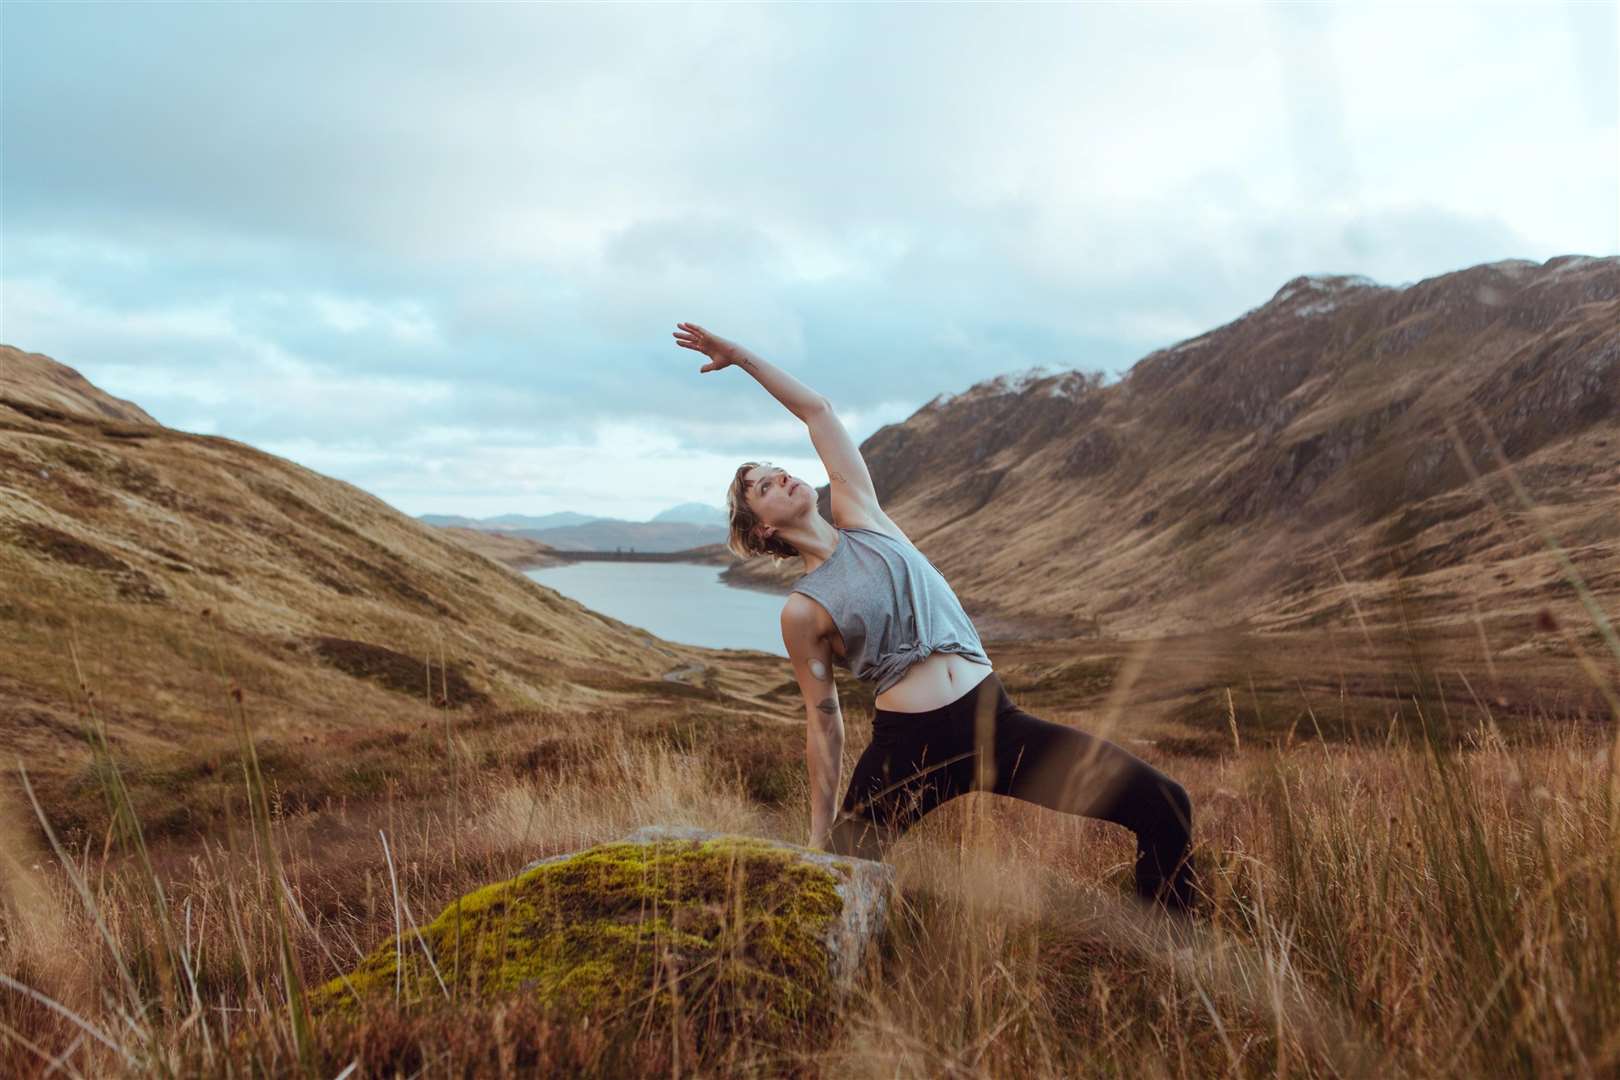 Mountaineering Scotland is offering a mountain skills and yoga weekend.